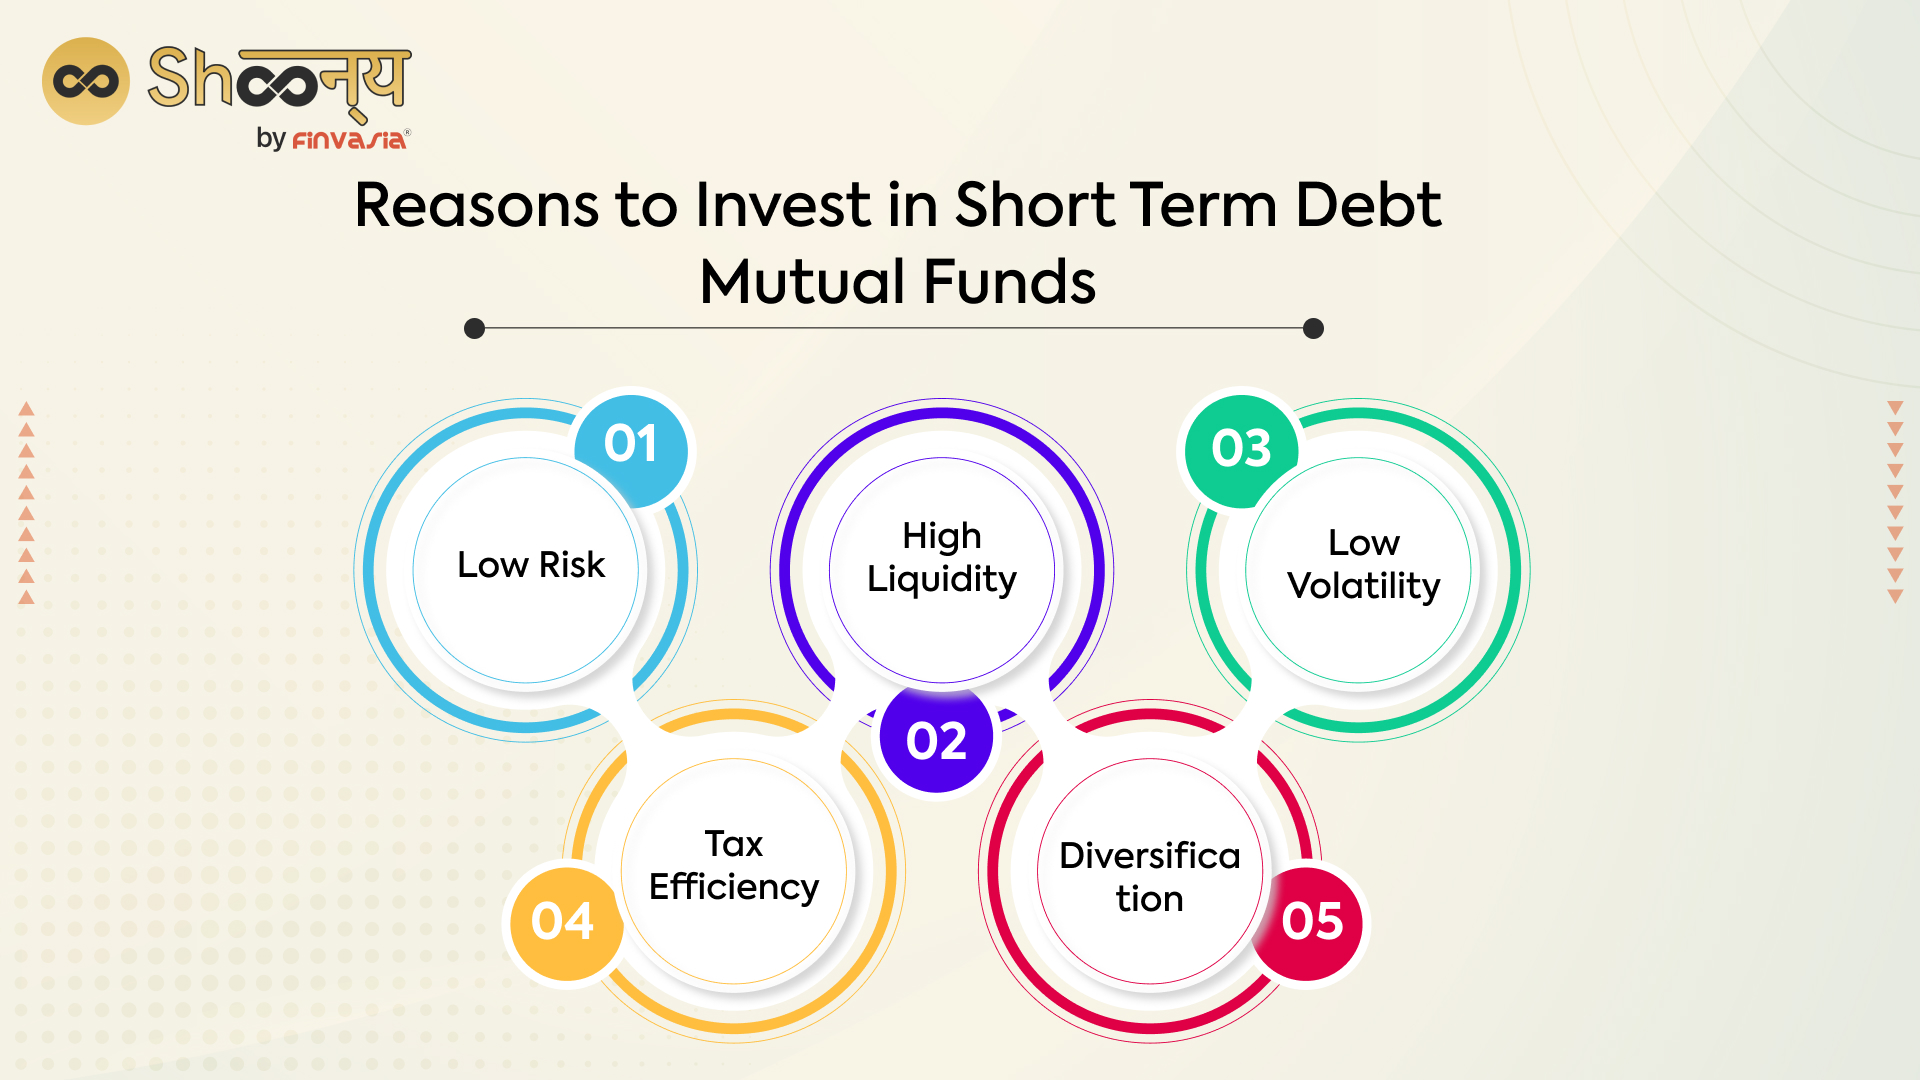 Reasons to Invest in Short Term Debt Mutual Funds